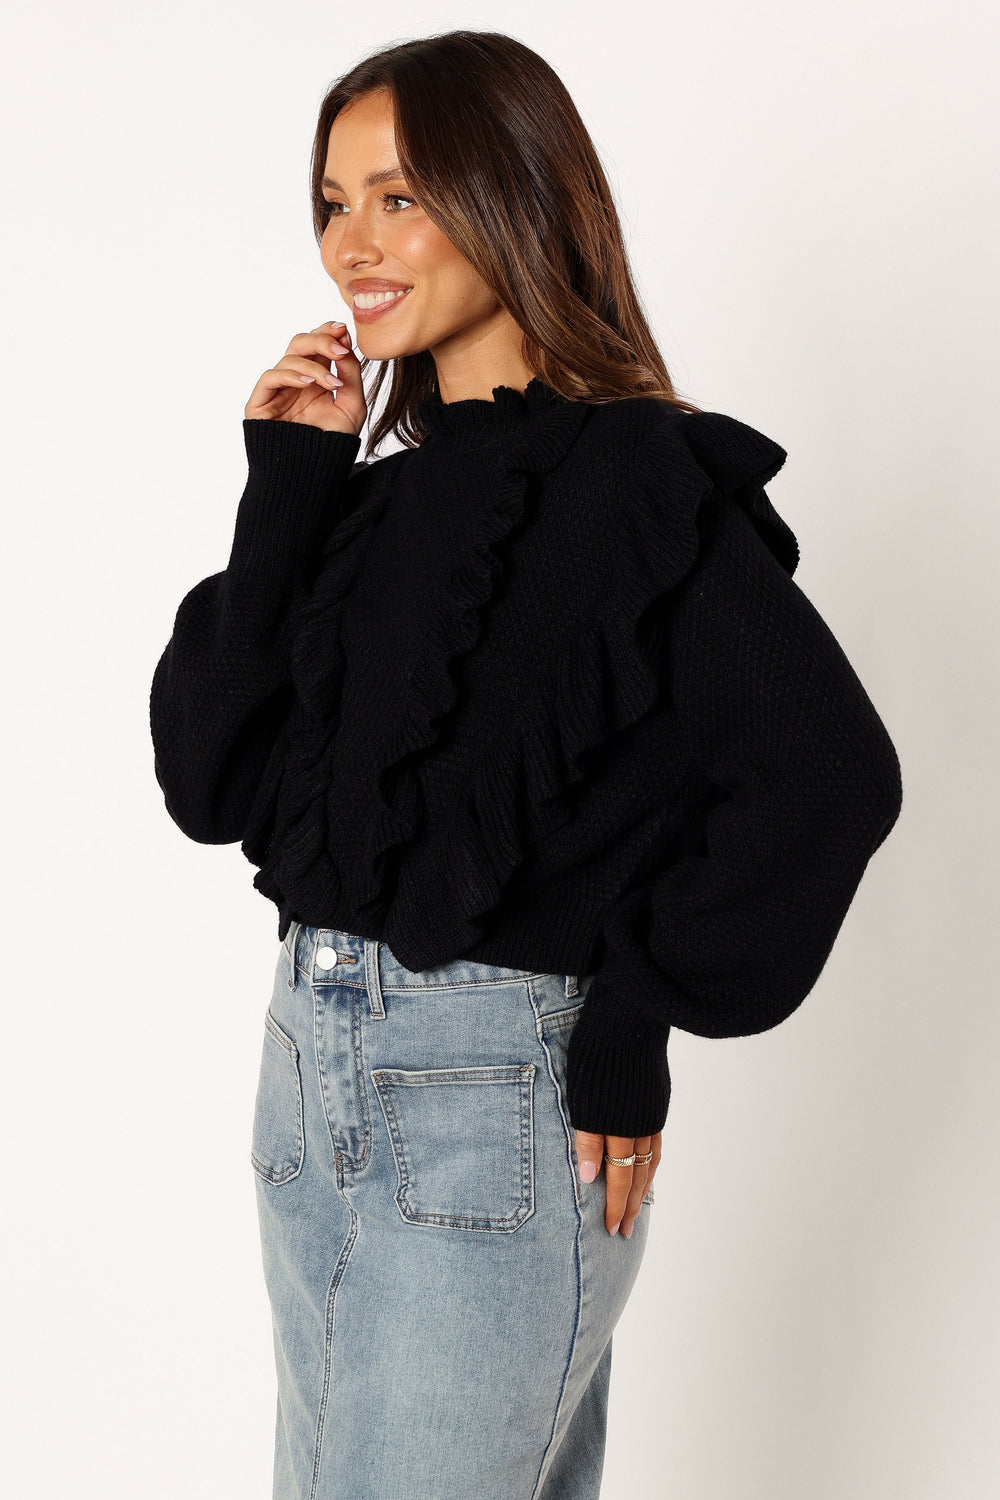 Petal and Pup USA TOPS Charice Knit Long Sleeve Top - Black